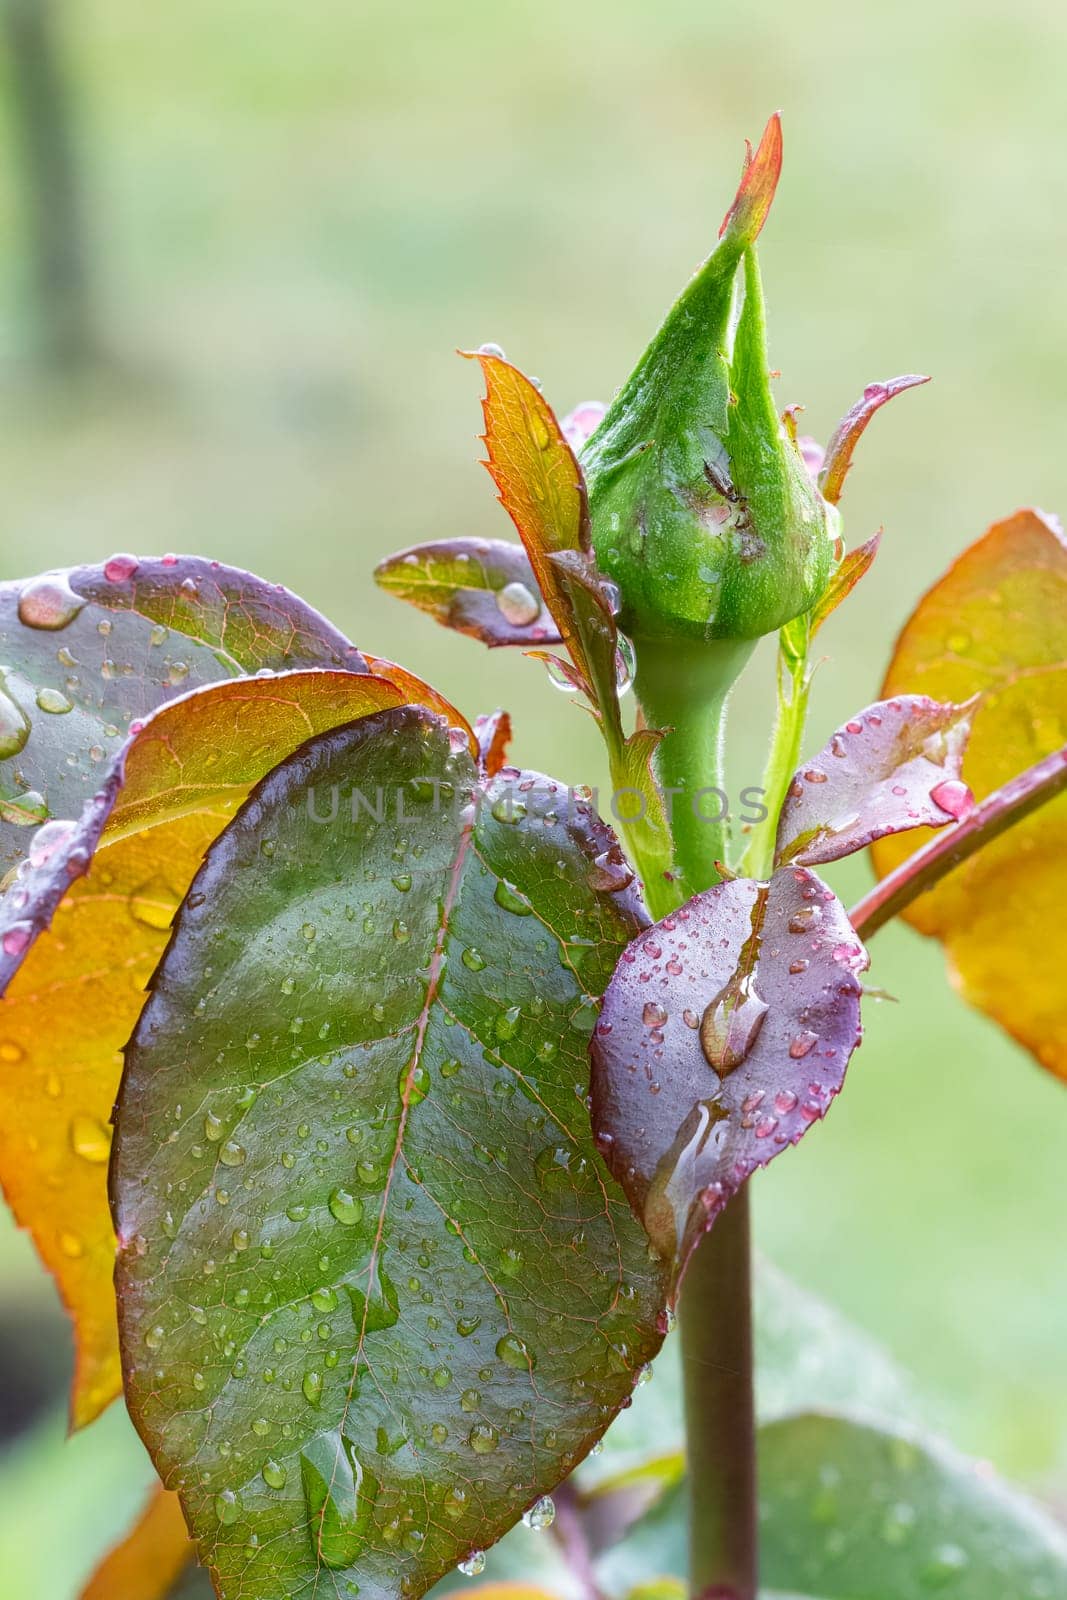 Close-up view of the rose bud on a stem with leaves growing in the garden. Shallow depth of field.